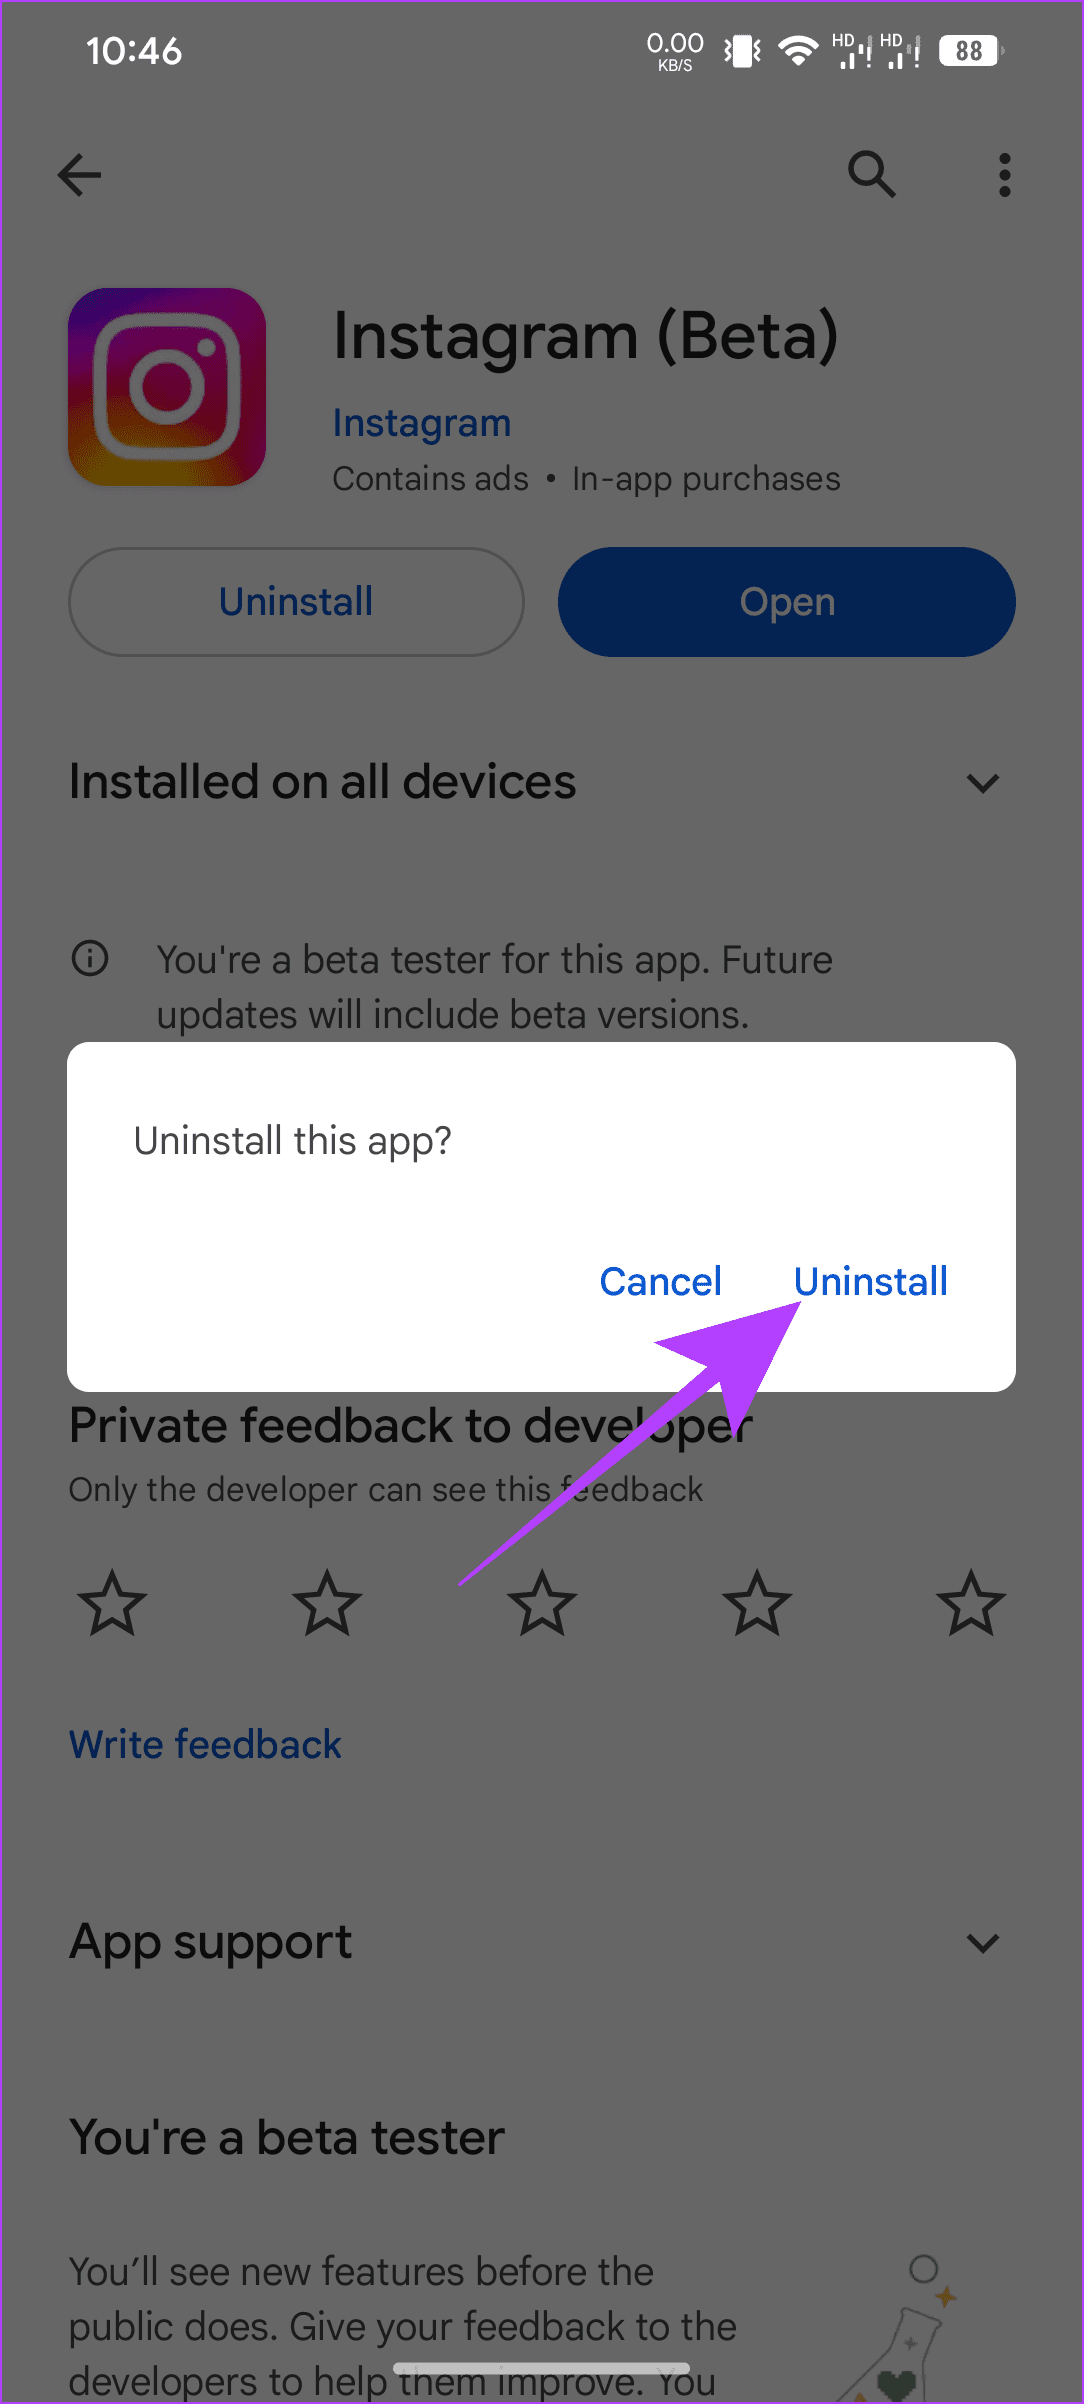 choose uninstall to confirm 8